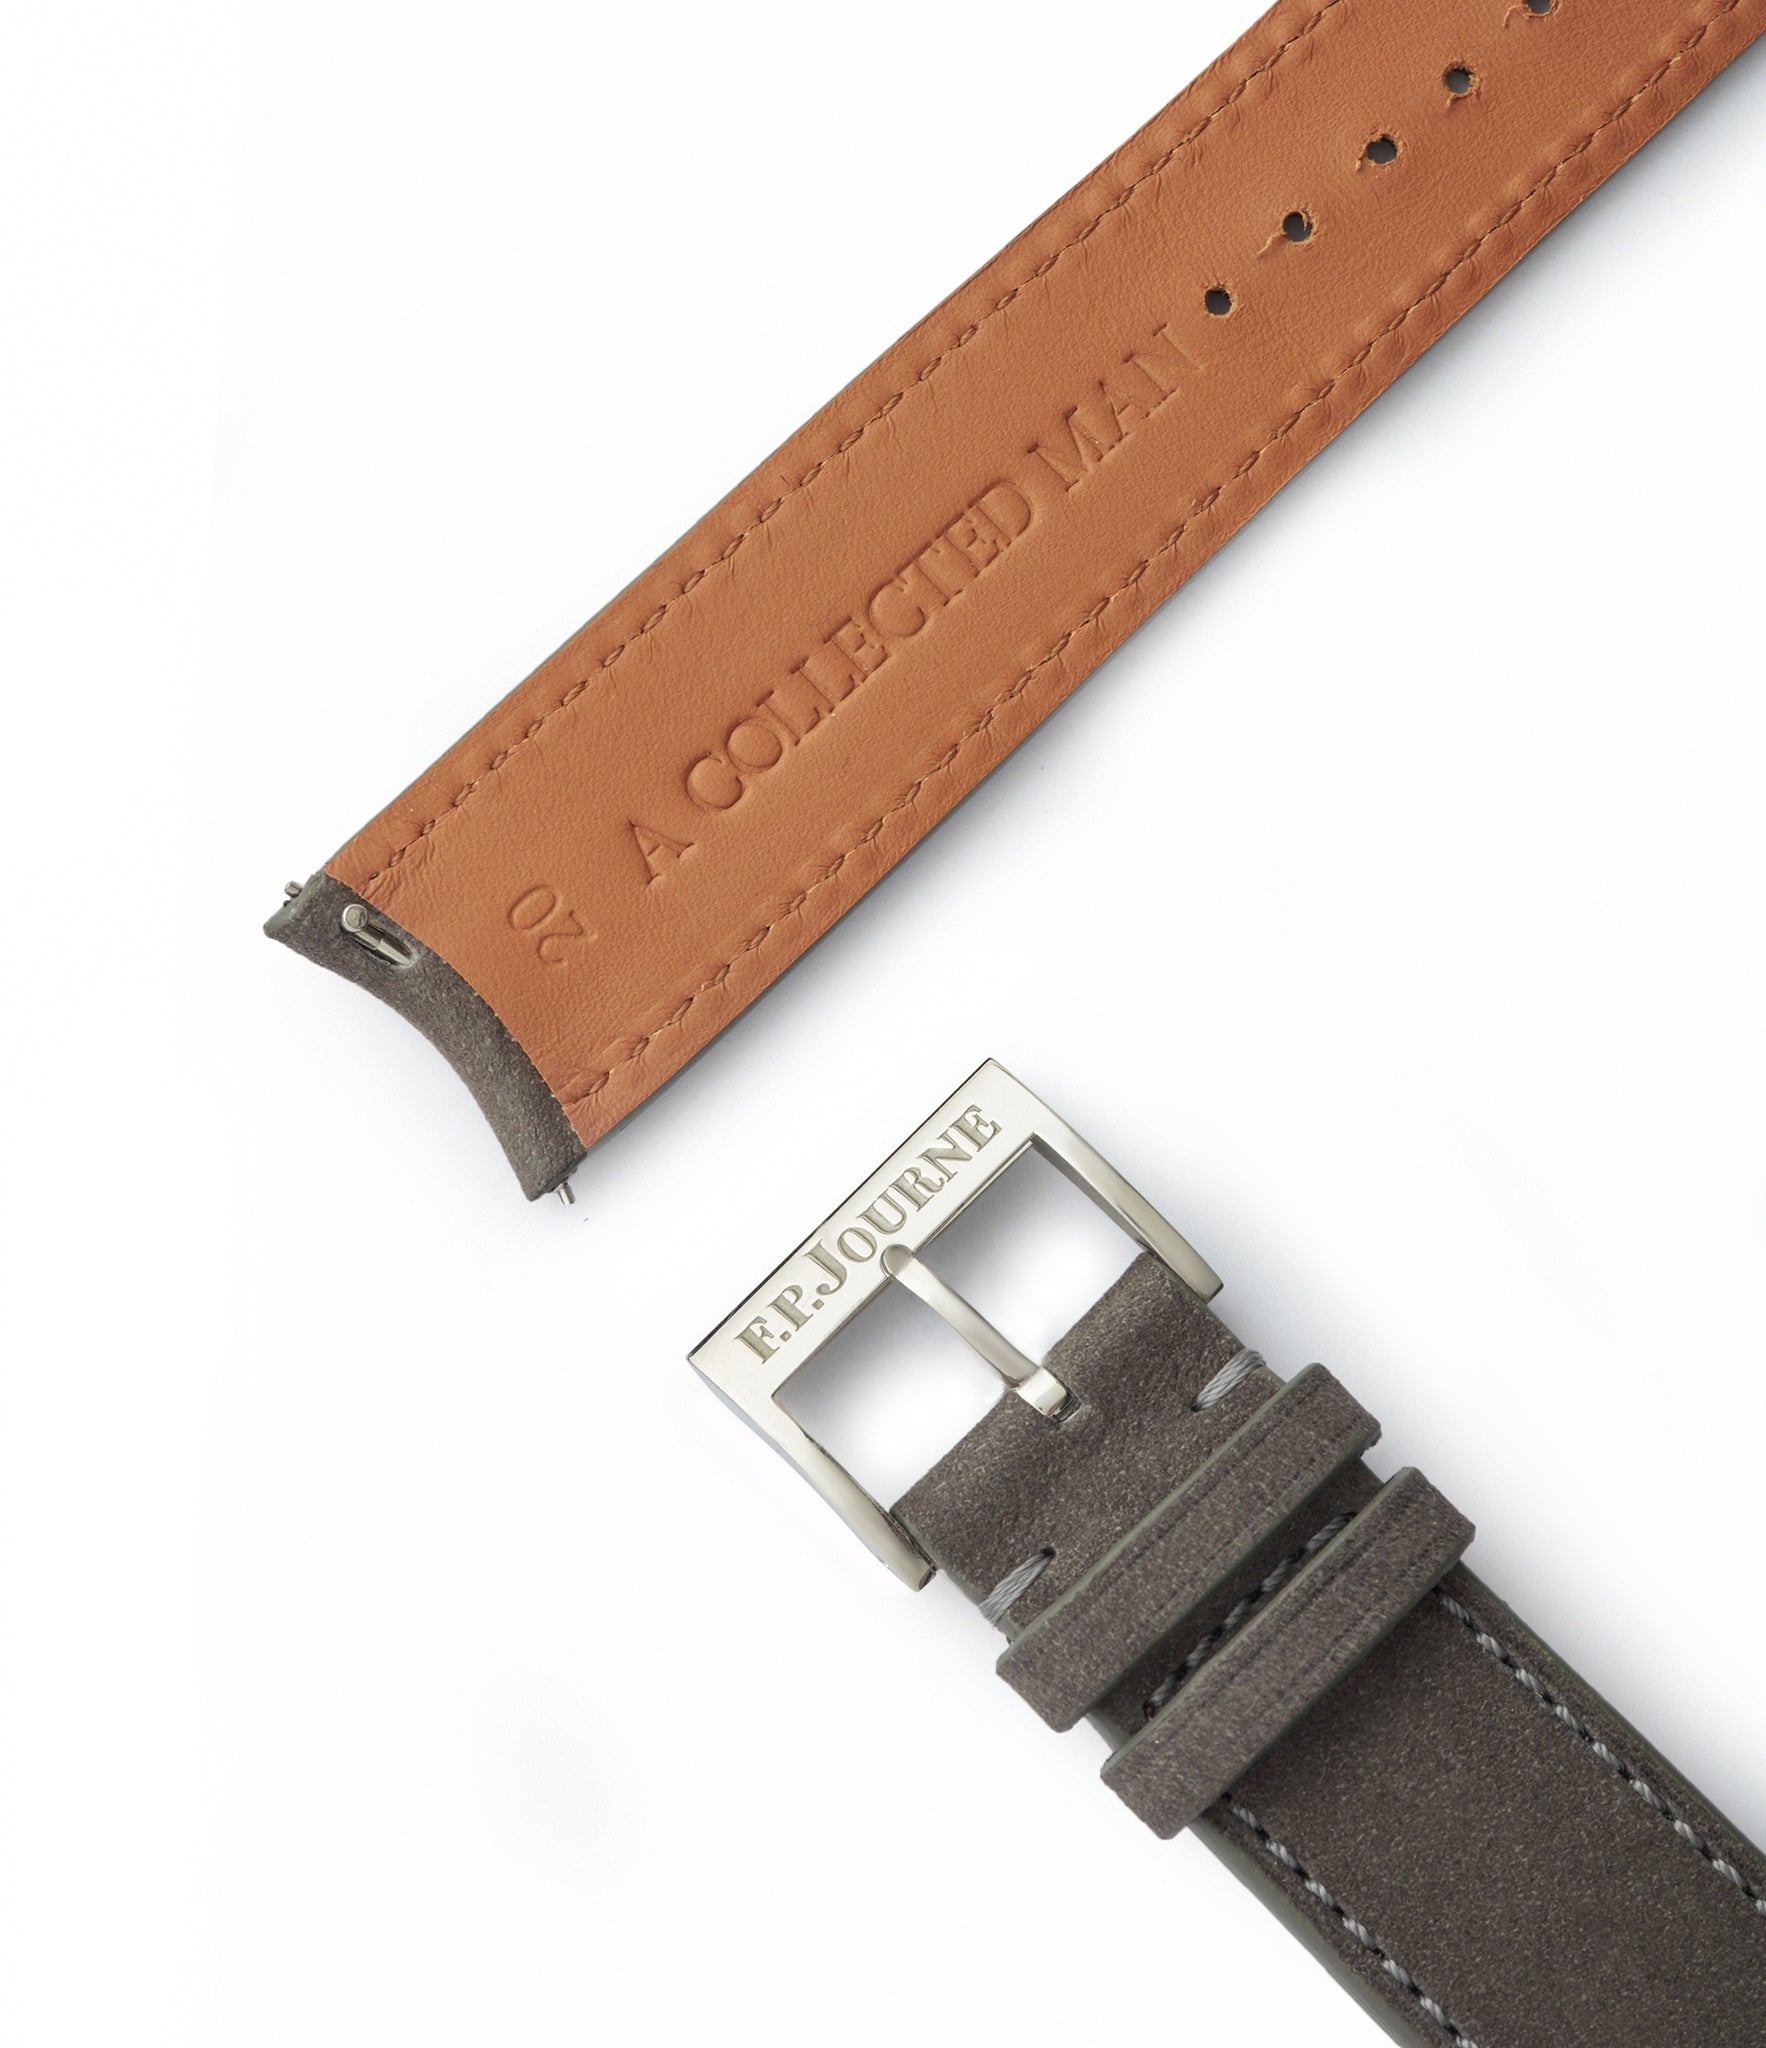 Buy nubuck quality watch strap in stormy pewter grey from A Collected Man London, in short or regular lengths. We are proud to offer these hand-crafted watch straps, thoughtfully made in Europe, to suit your watch. Available to order online for worldwide delivery.